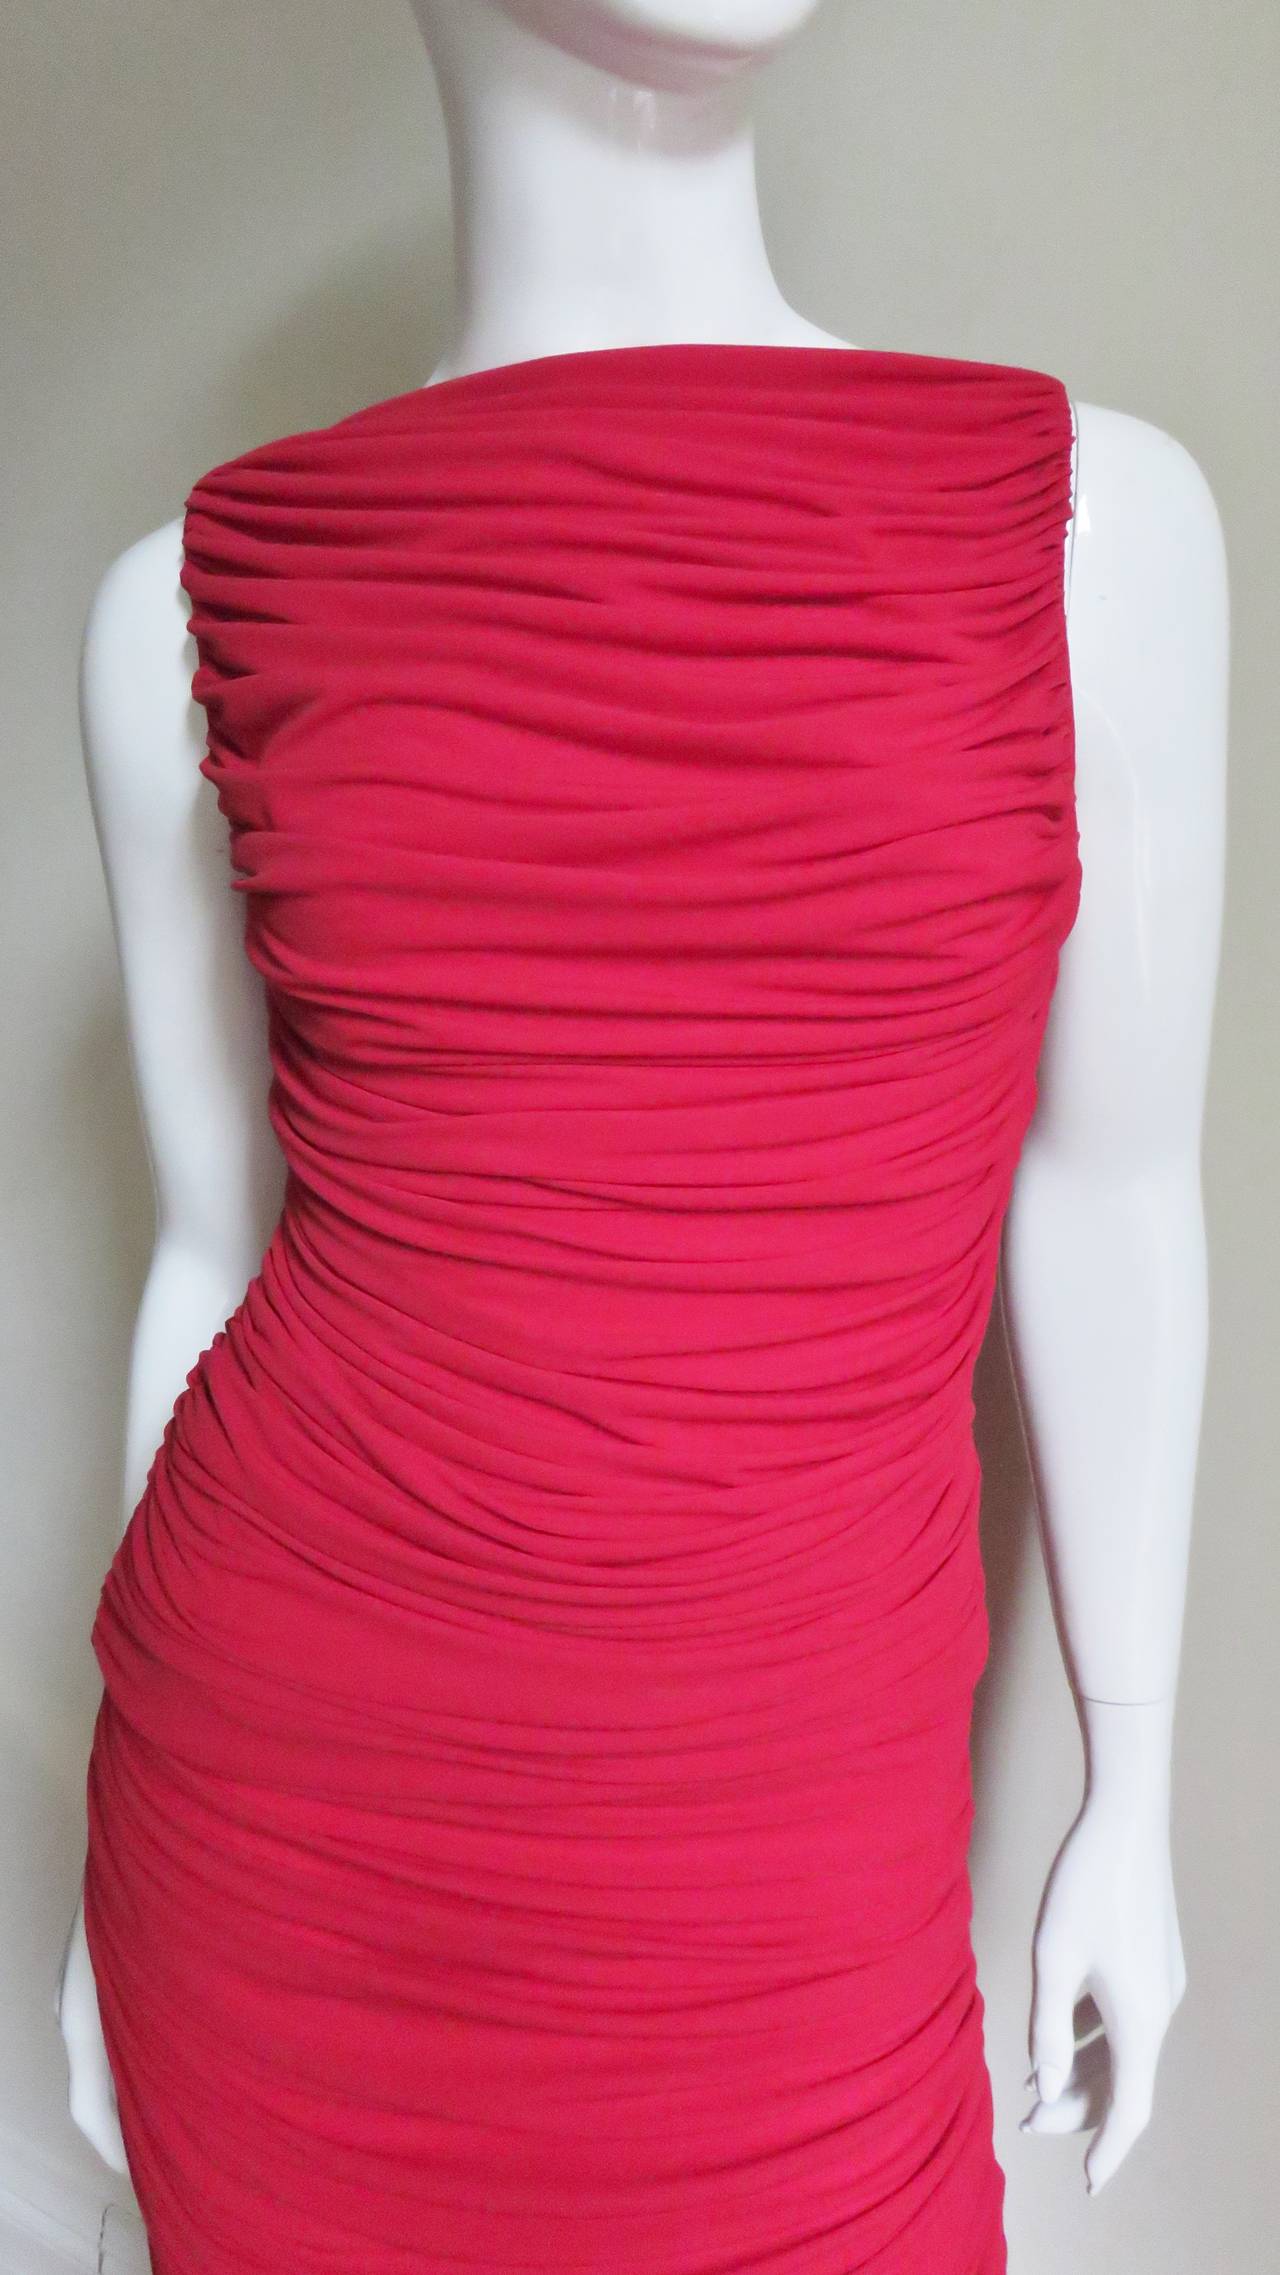 A great set in red silk jersey skirt and top from Norma Kamali.  Both pieces are ruched at the sides with the fabric draping across the front and back creating folds.  The top is sleeveless with a bateau neckline and the skirt is straight cut to